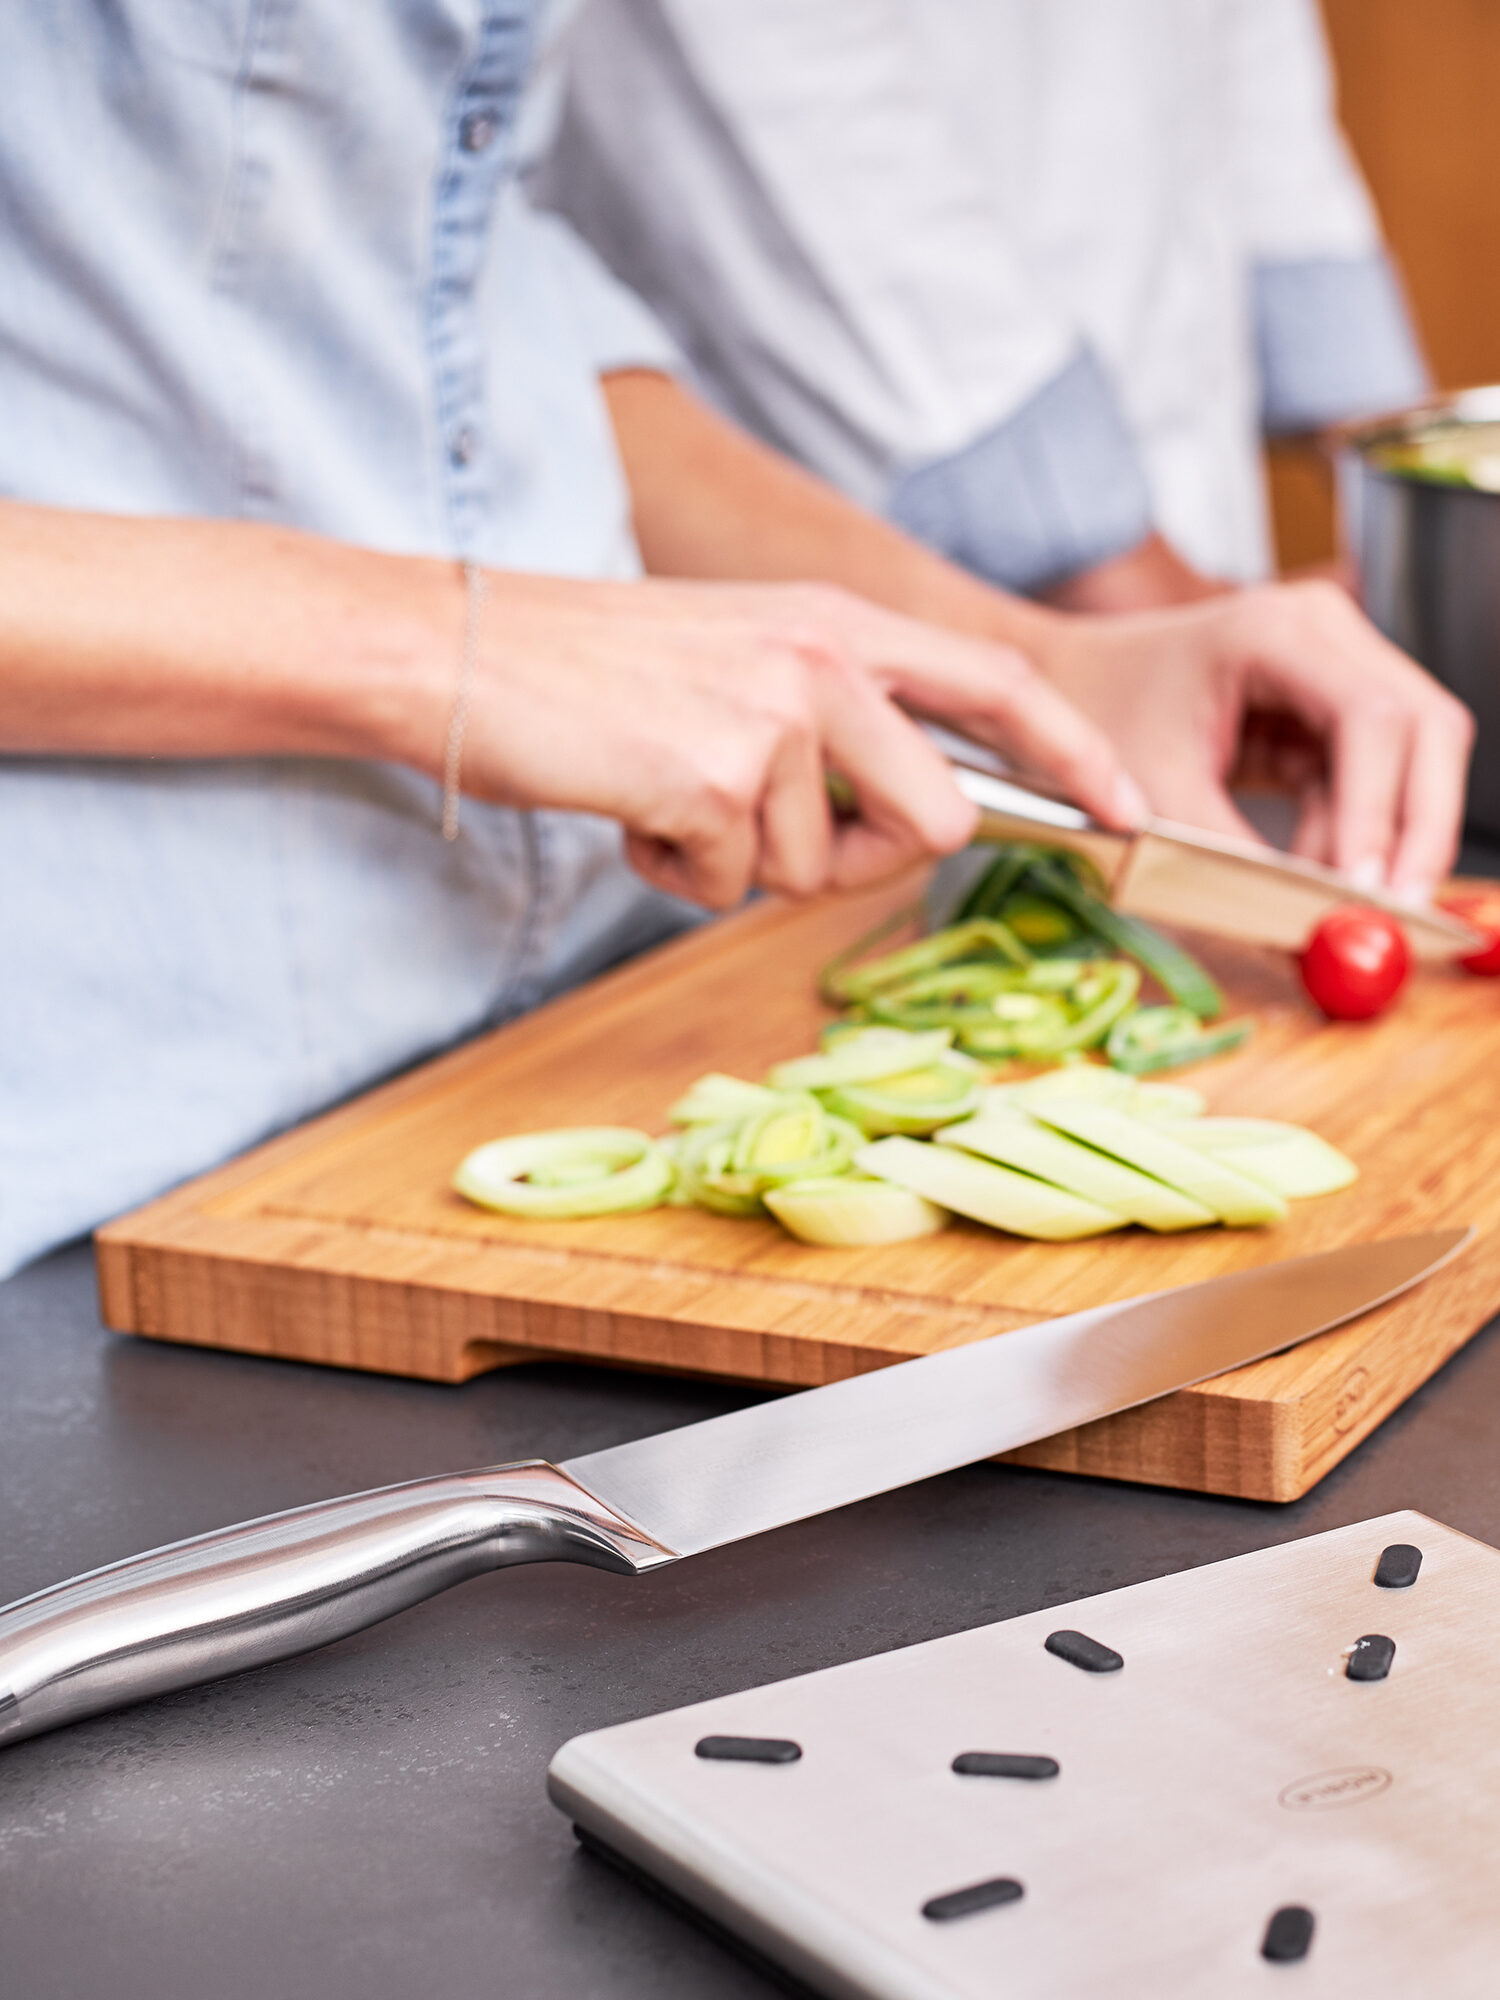 A person slicing cucumbers and tomatoes on a wooden cutting board in a kitchen, with a focus on their hands and the vegetables.